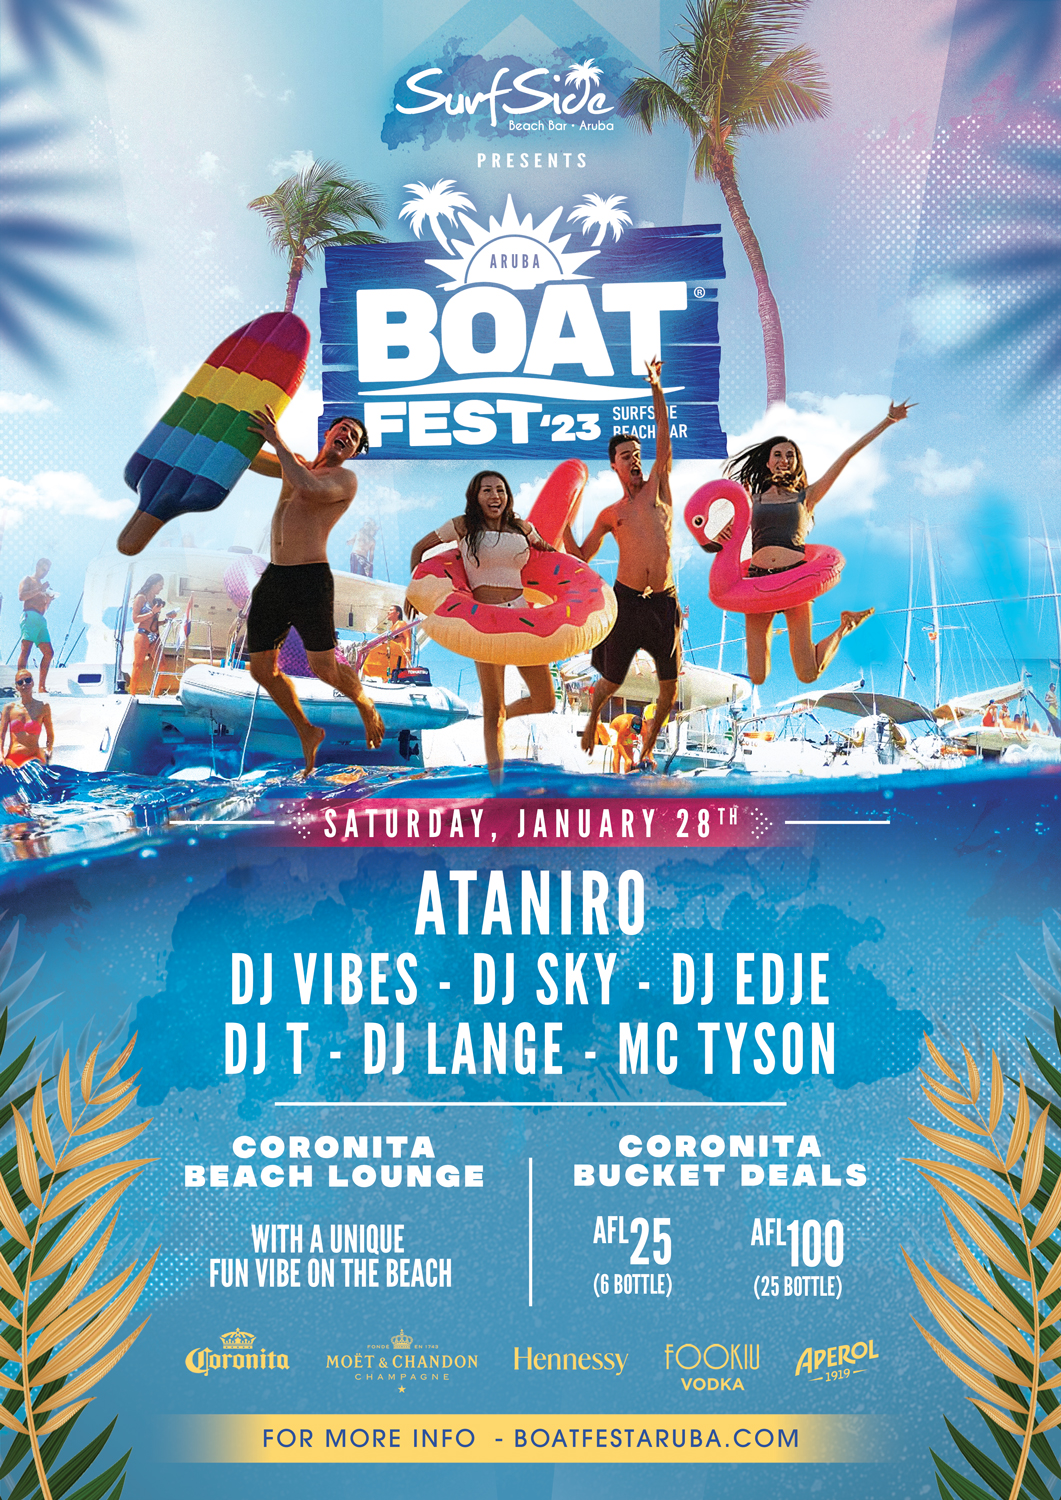 Aruba’s biggest beach event of the year, ‘Boat Fest’, is back